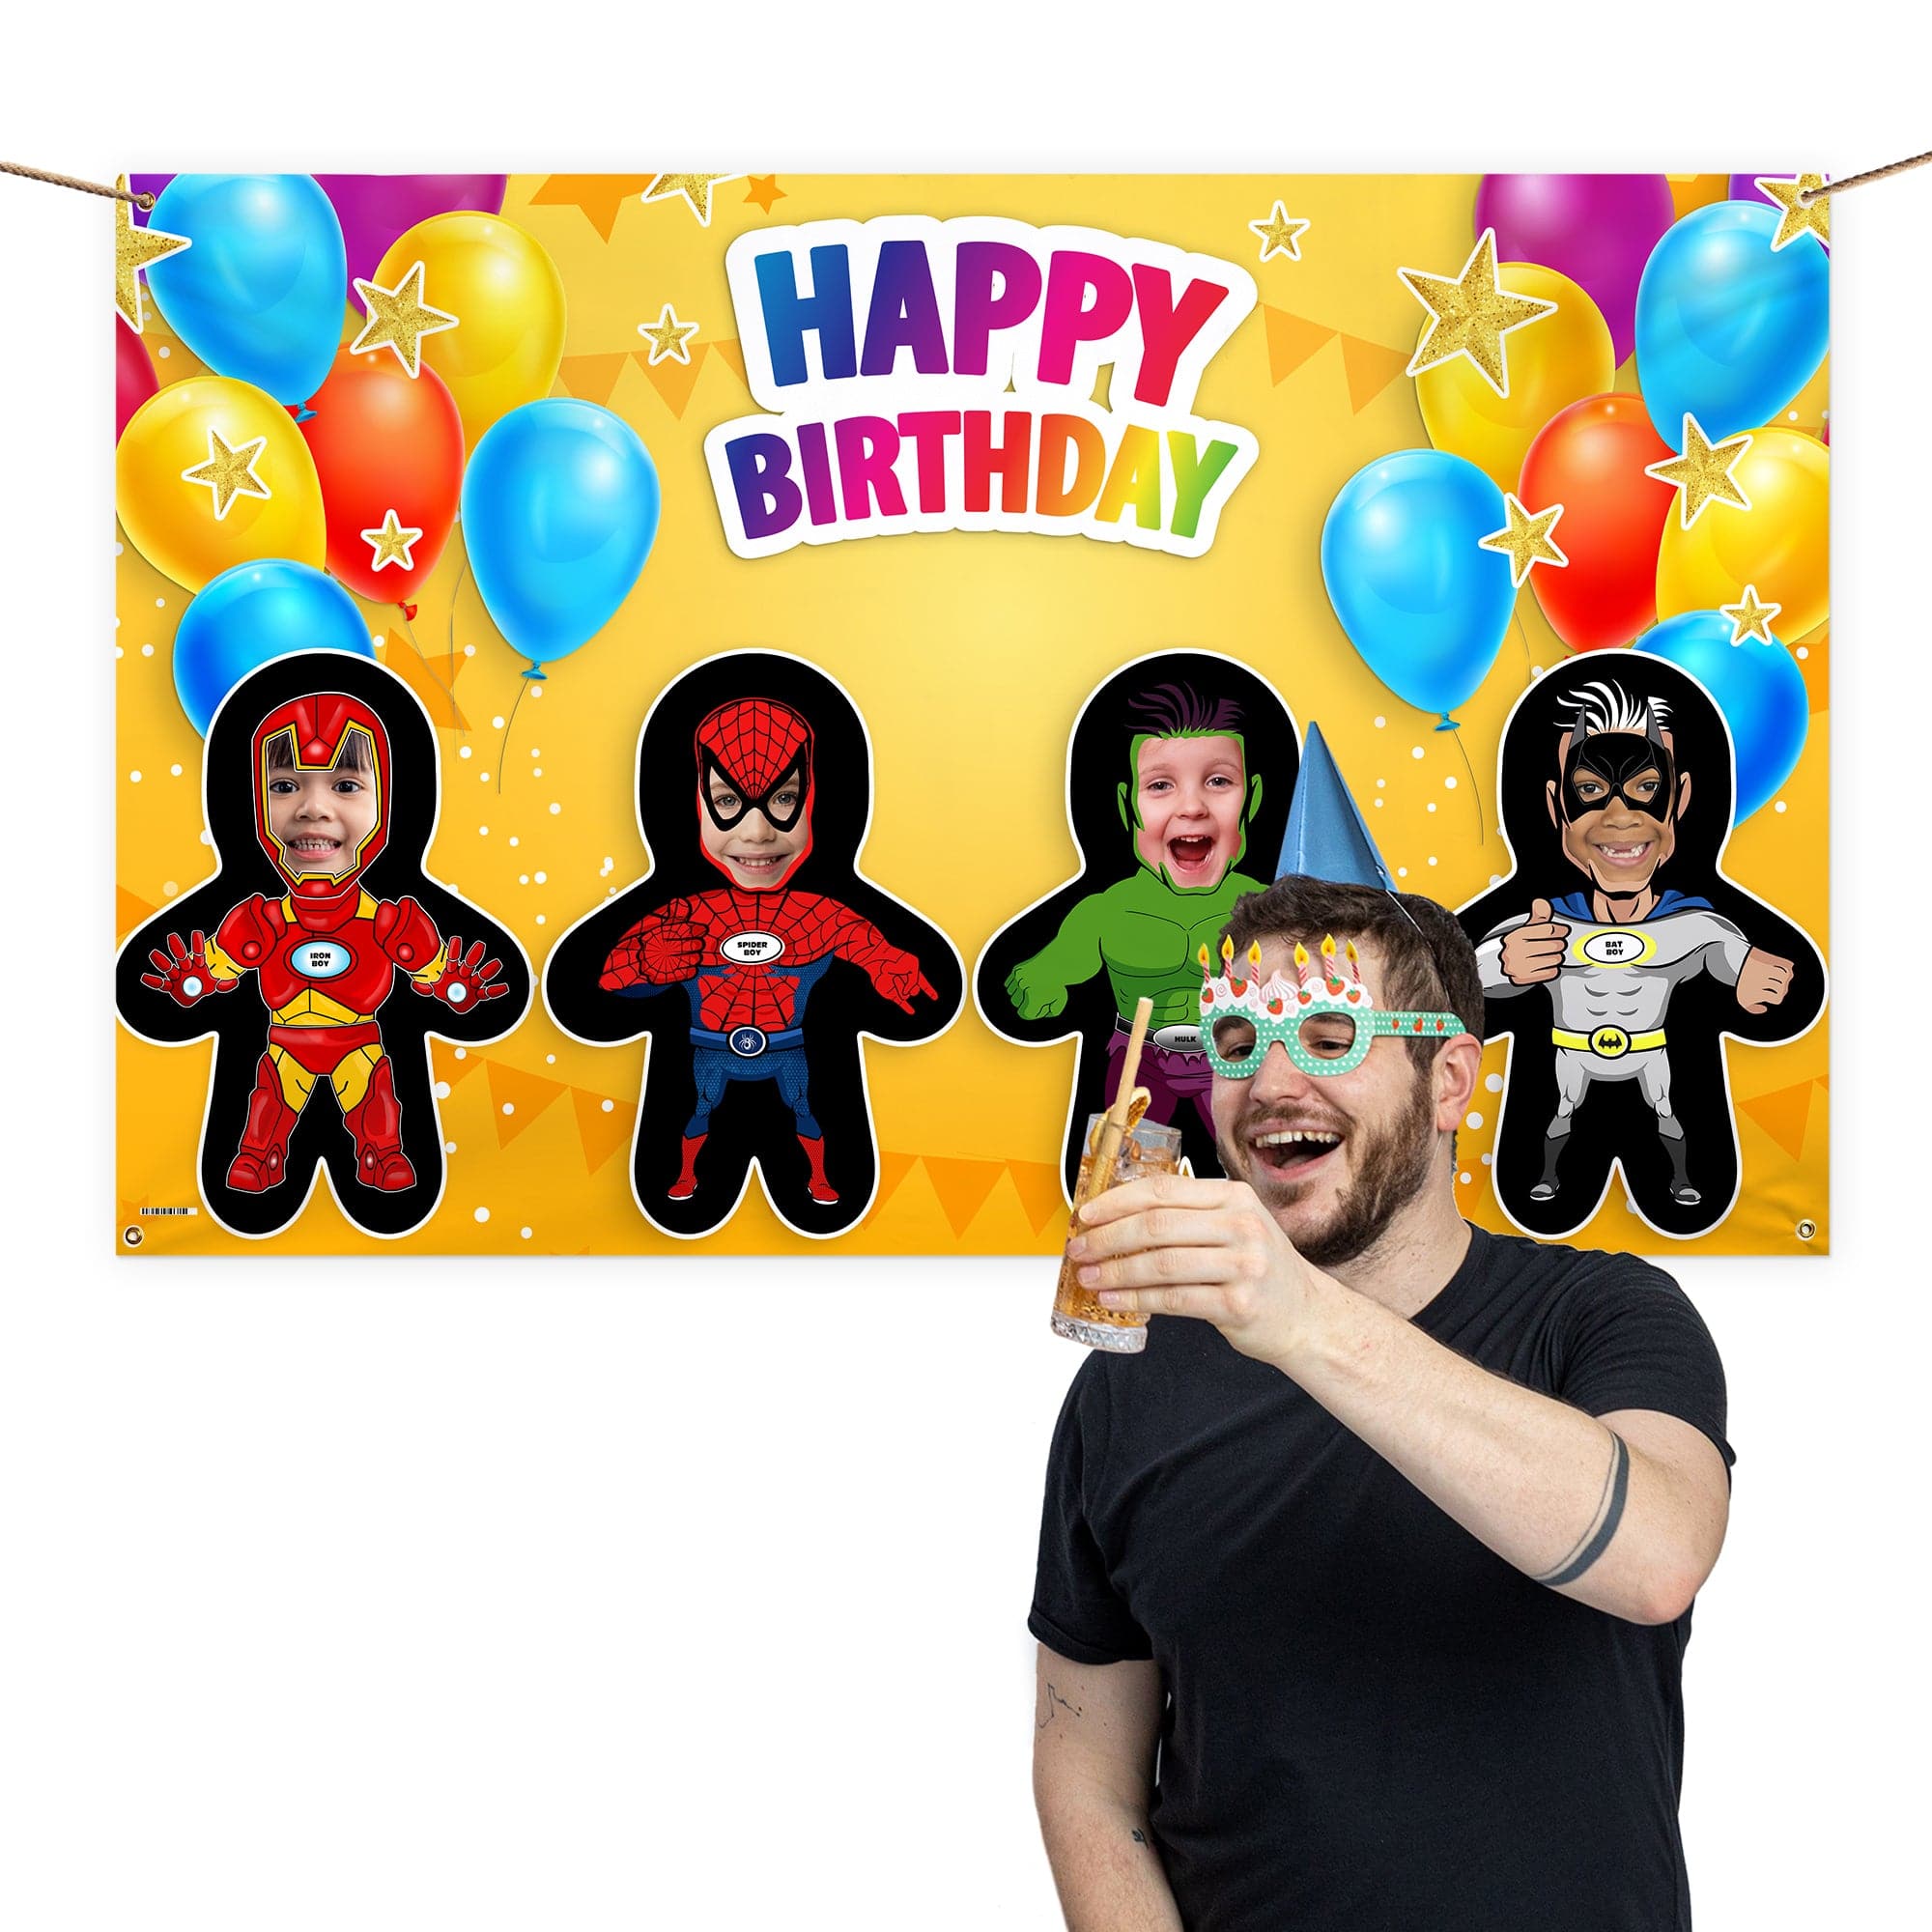 Superhero's - Mini Me World - Add Any Text And Your Face - 5FT X 3FT